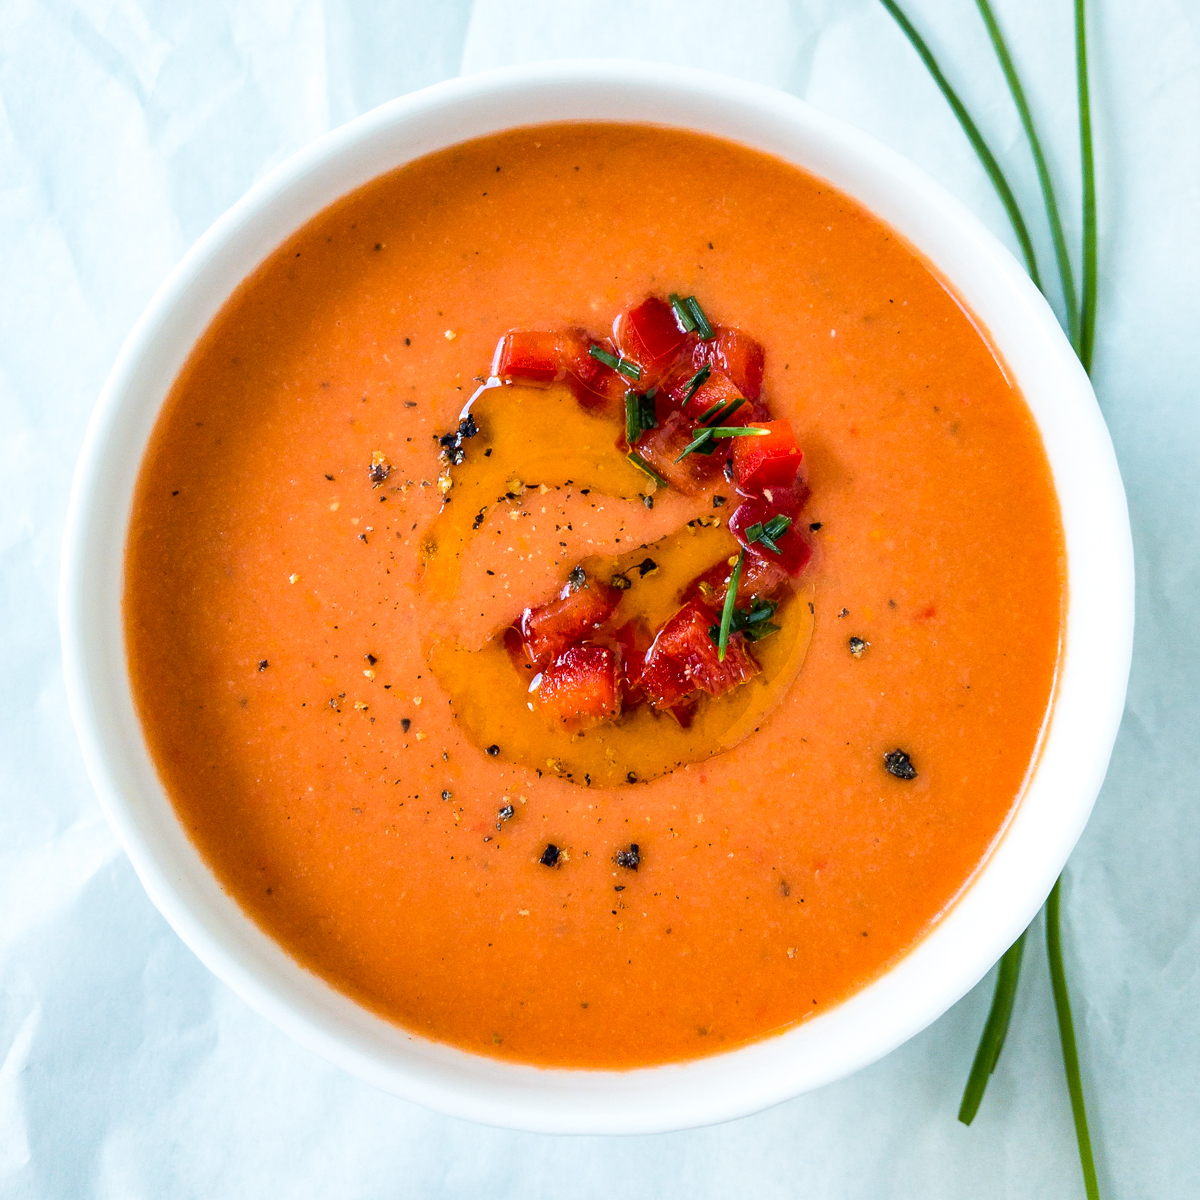 Simple Silky Smooth Gazpacho - The Genetic Chef